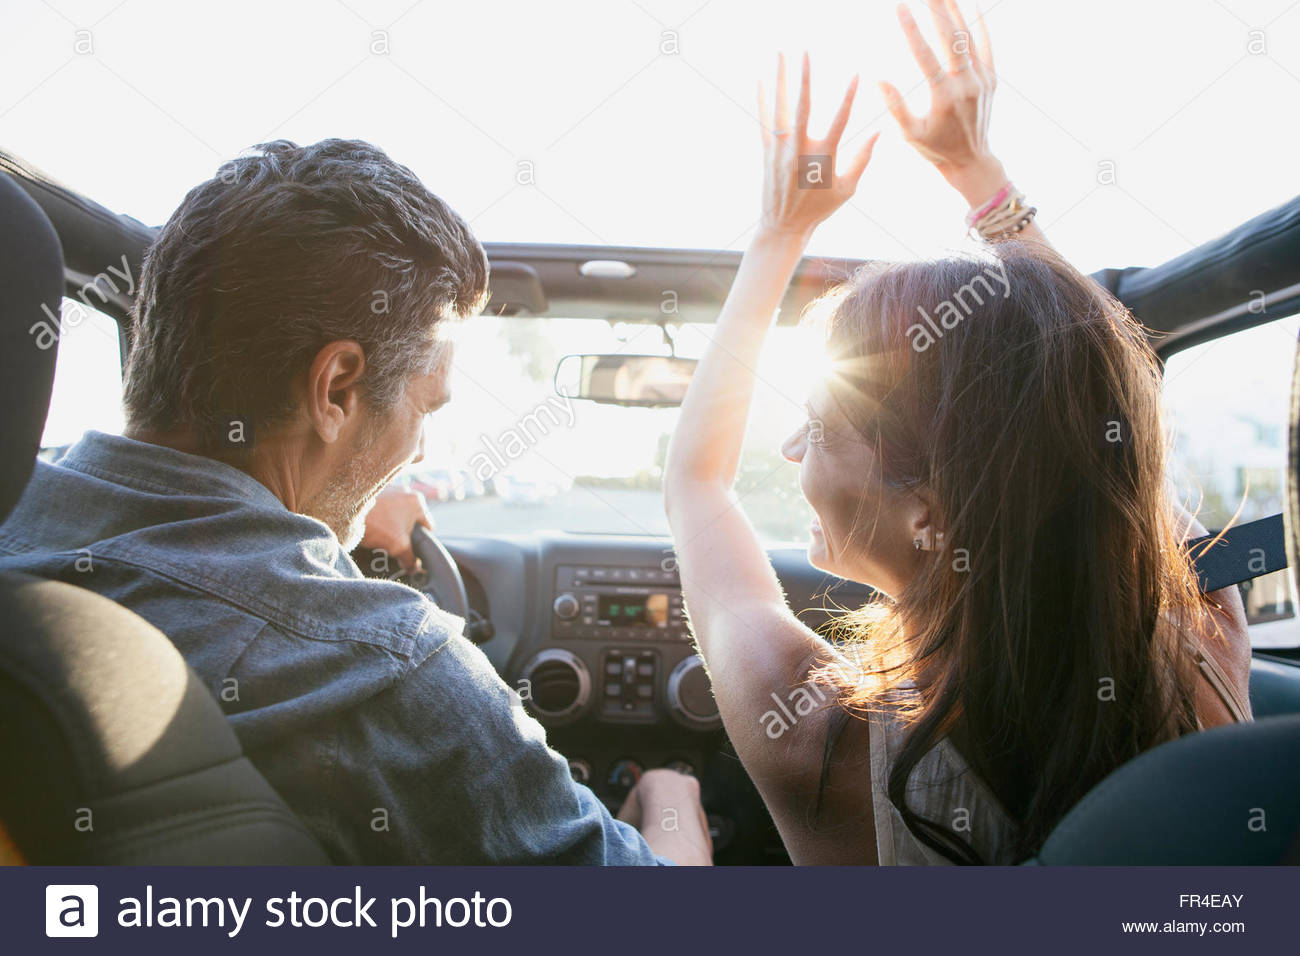 woman with arms in the air in convertible Stock Photo